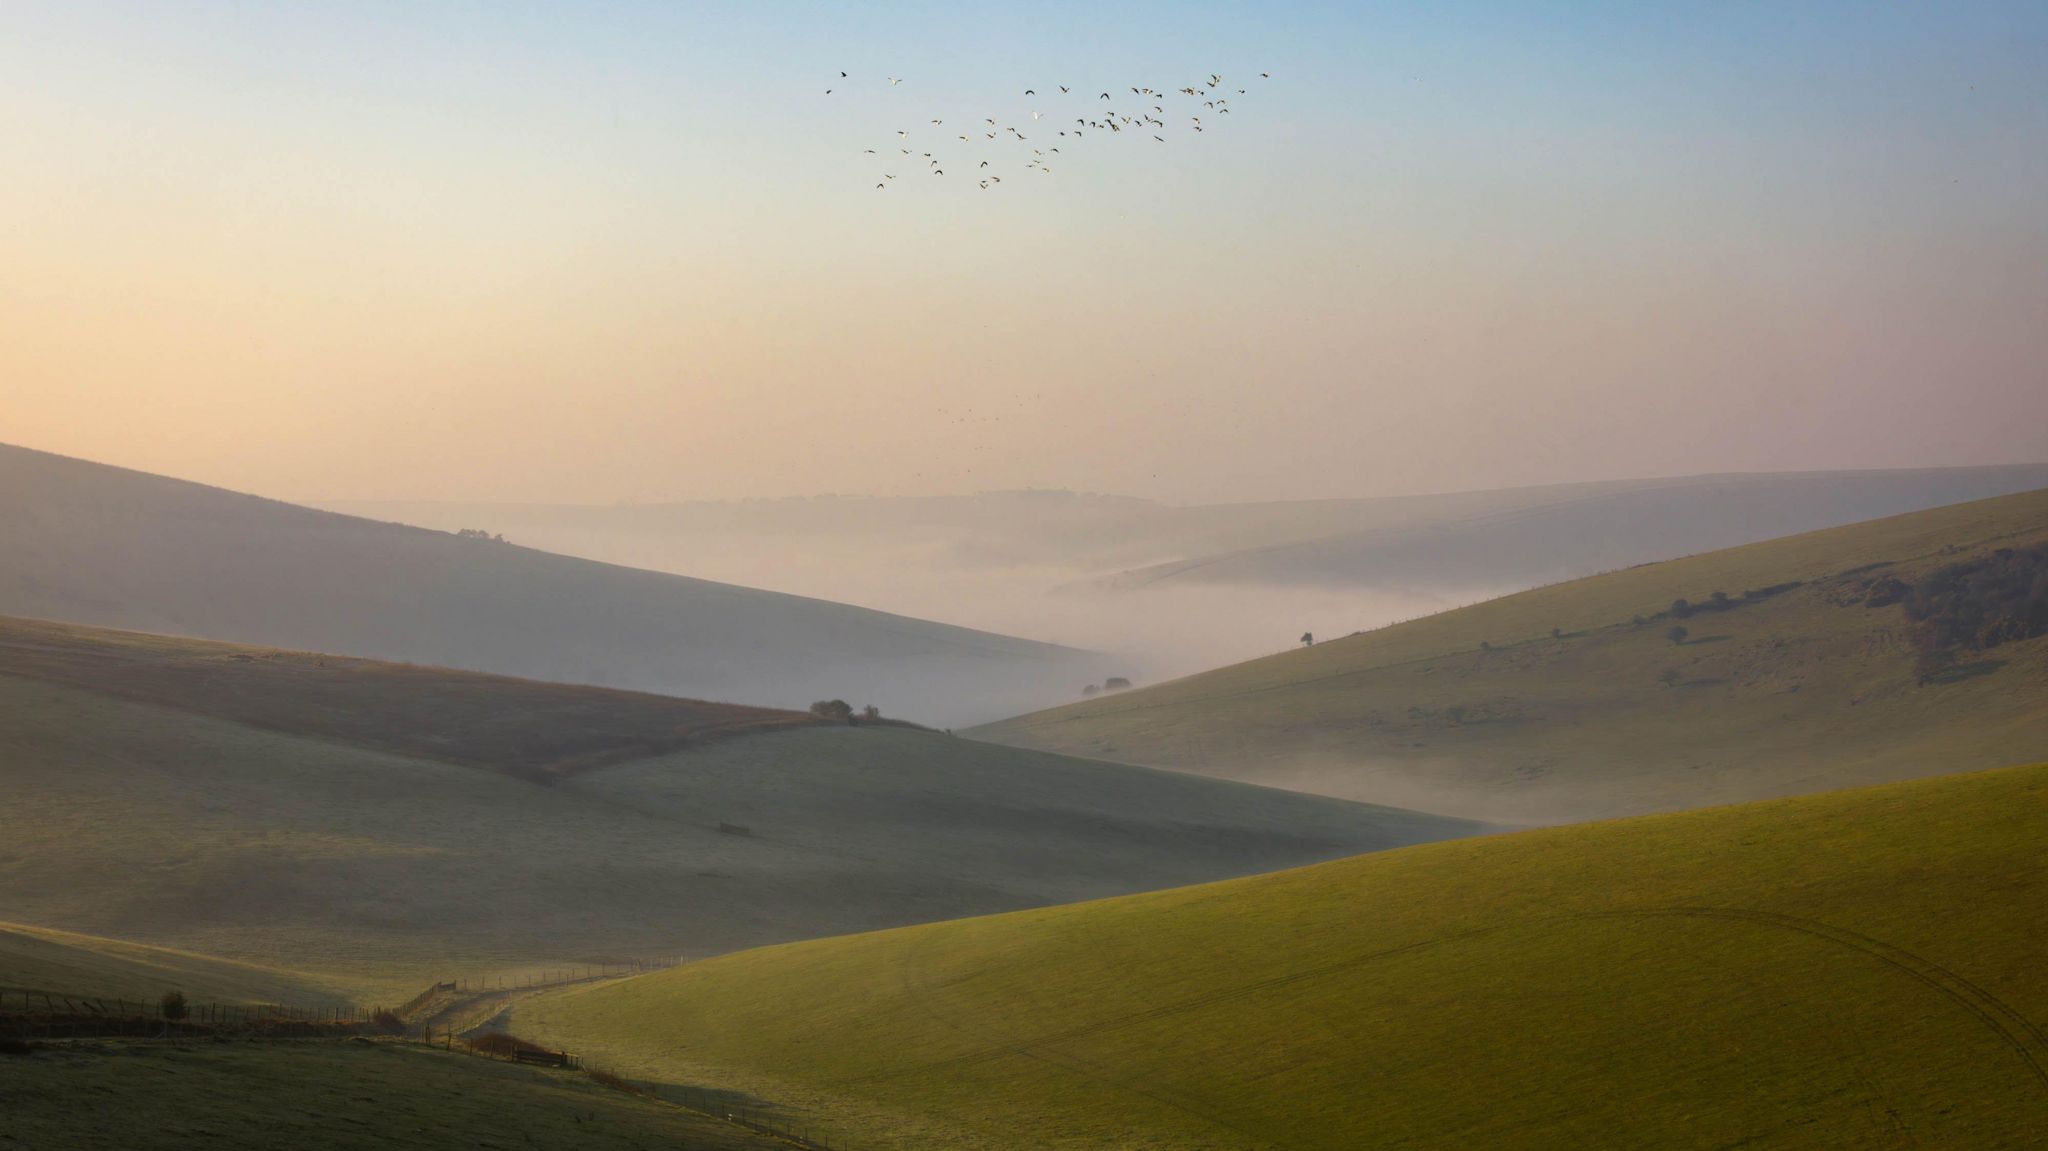 "Kingston Ridge", taken by James Ratchford, which was runner up in the South Downs National Park's Annual Photo Competition. Image shows a number of birds flying over hills near Lewes, East Sussex